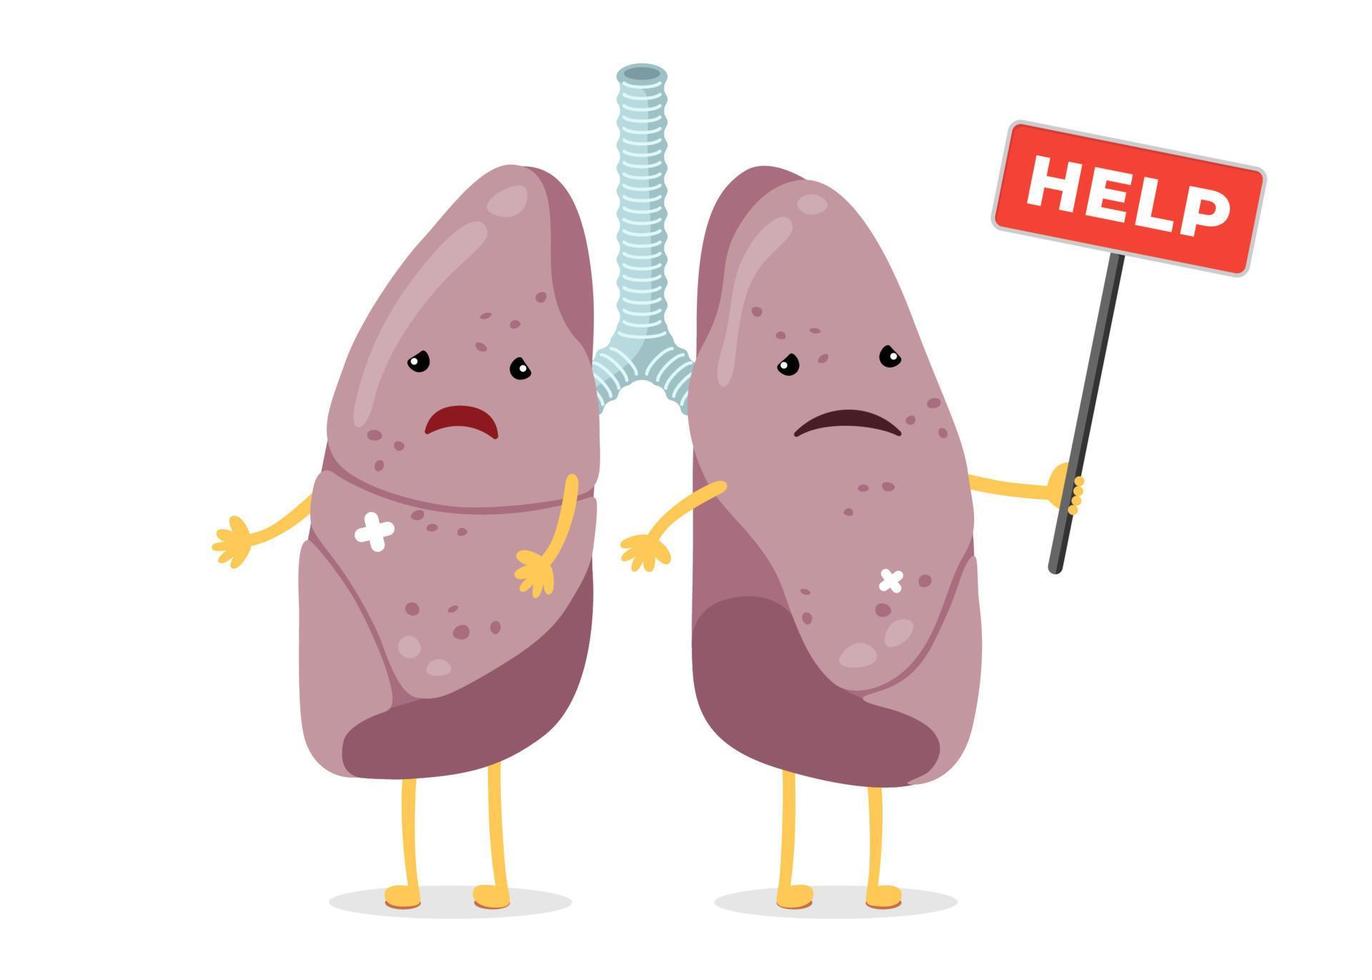 Cartoon sad suffering sick lungs characters. Unhealthy damage human respiratory system internal organ mascot with help sign. Illness and pain lung pair concept. Medical anatomy damage vector eps